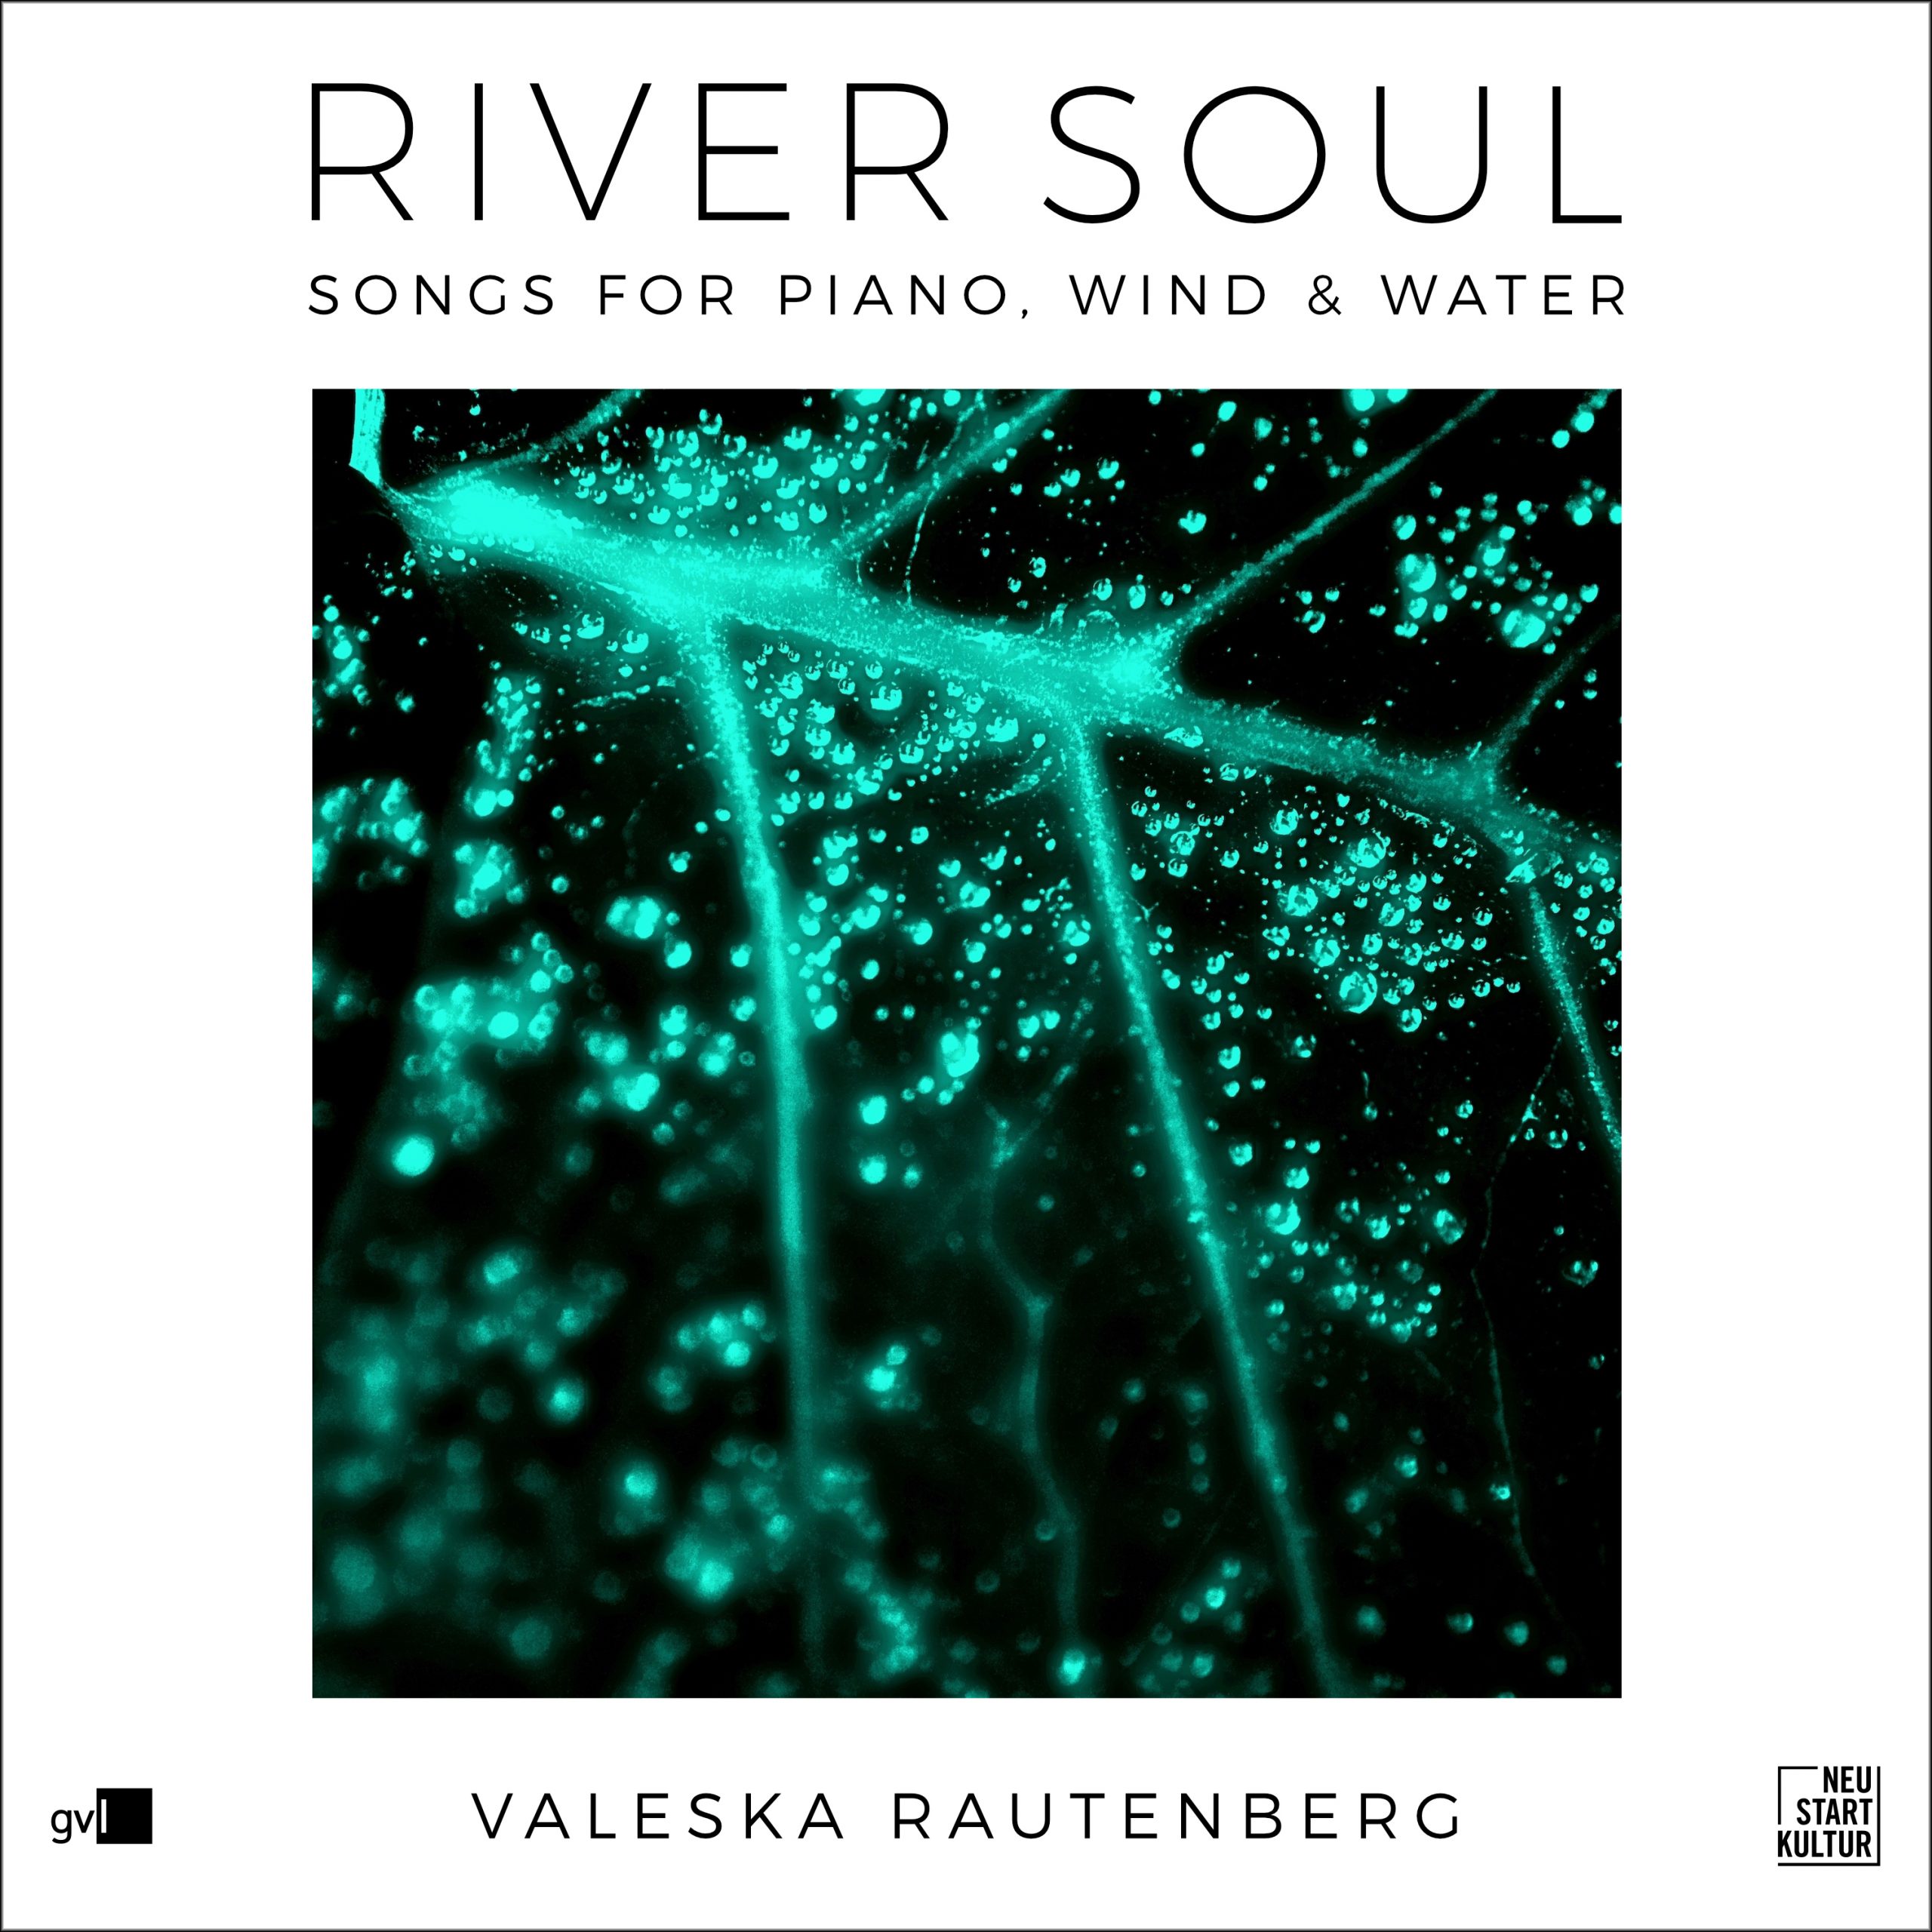 RIVER SOUL (SONGS FOR PIANO, WIND & WATER) EP – Out Now